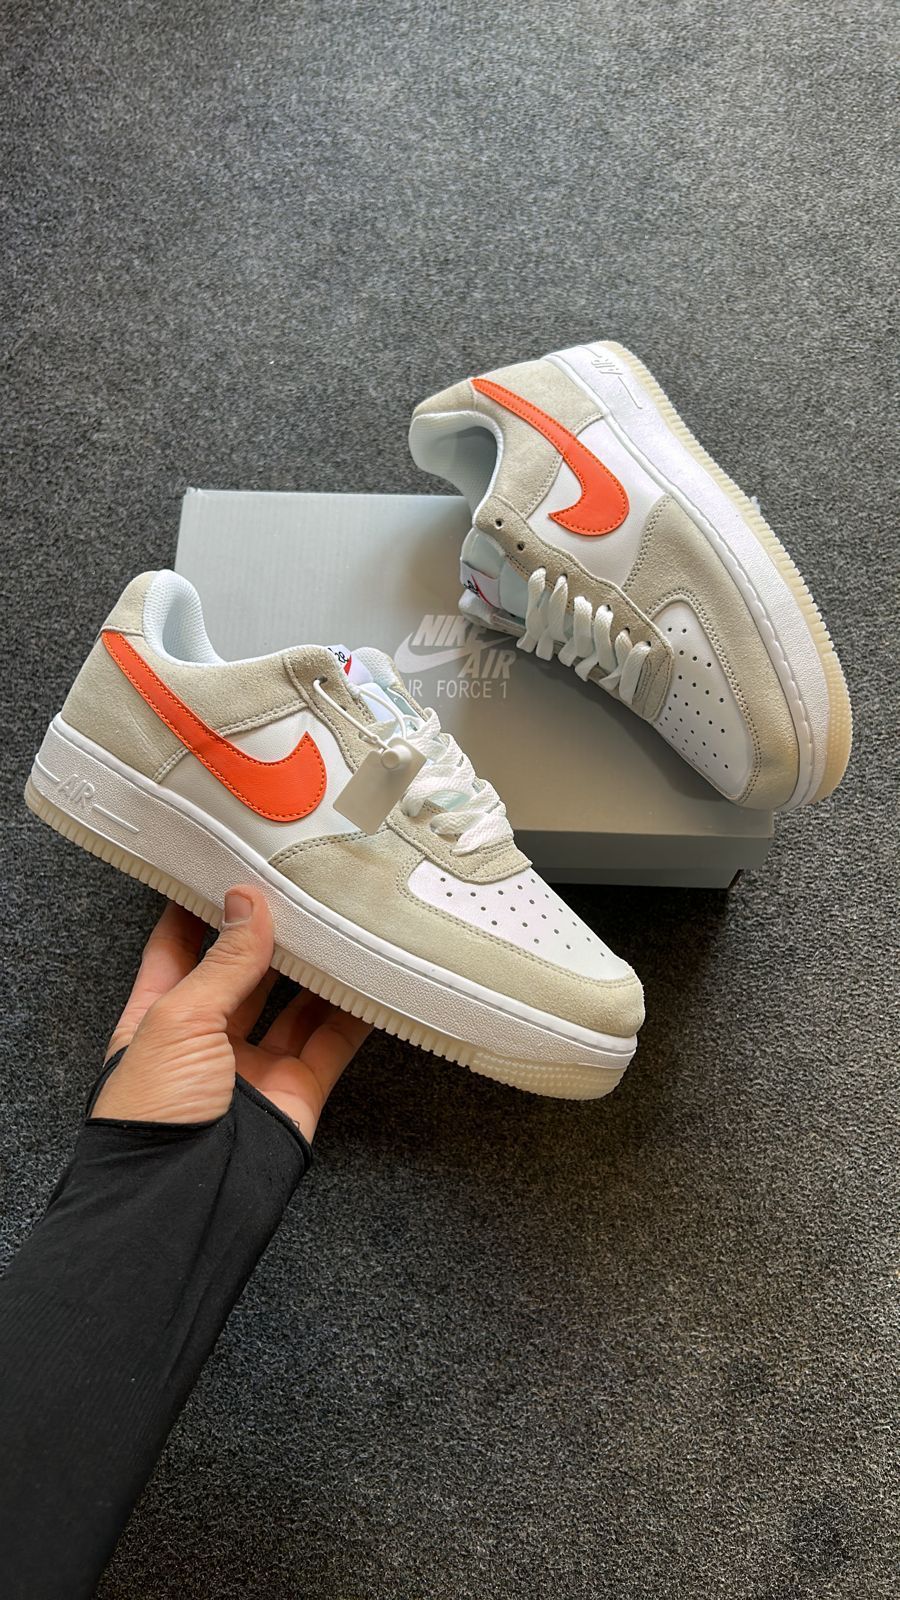 New Airforce Sneakers 2 Colors